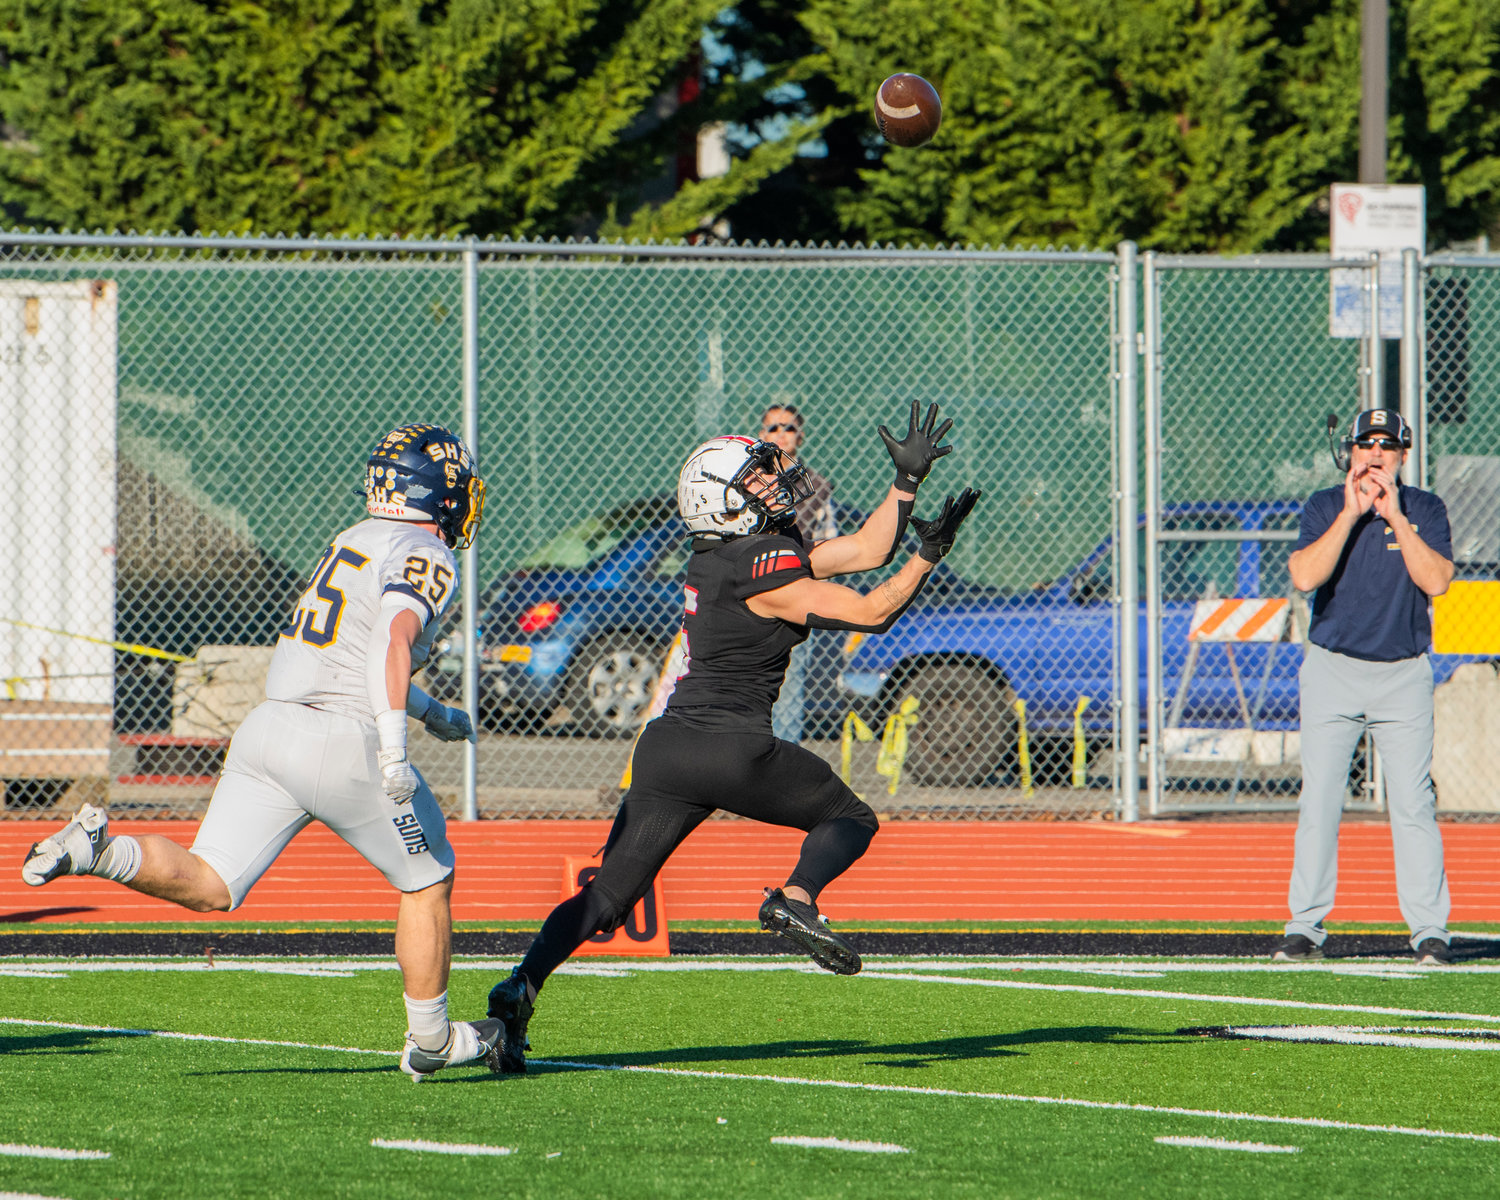 Yelm senior Kyler Ronquillo (5) makes a reception during a game against Southridge on Saturday.